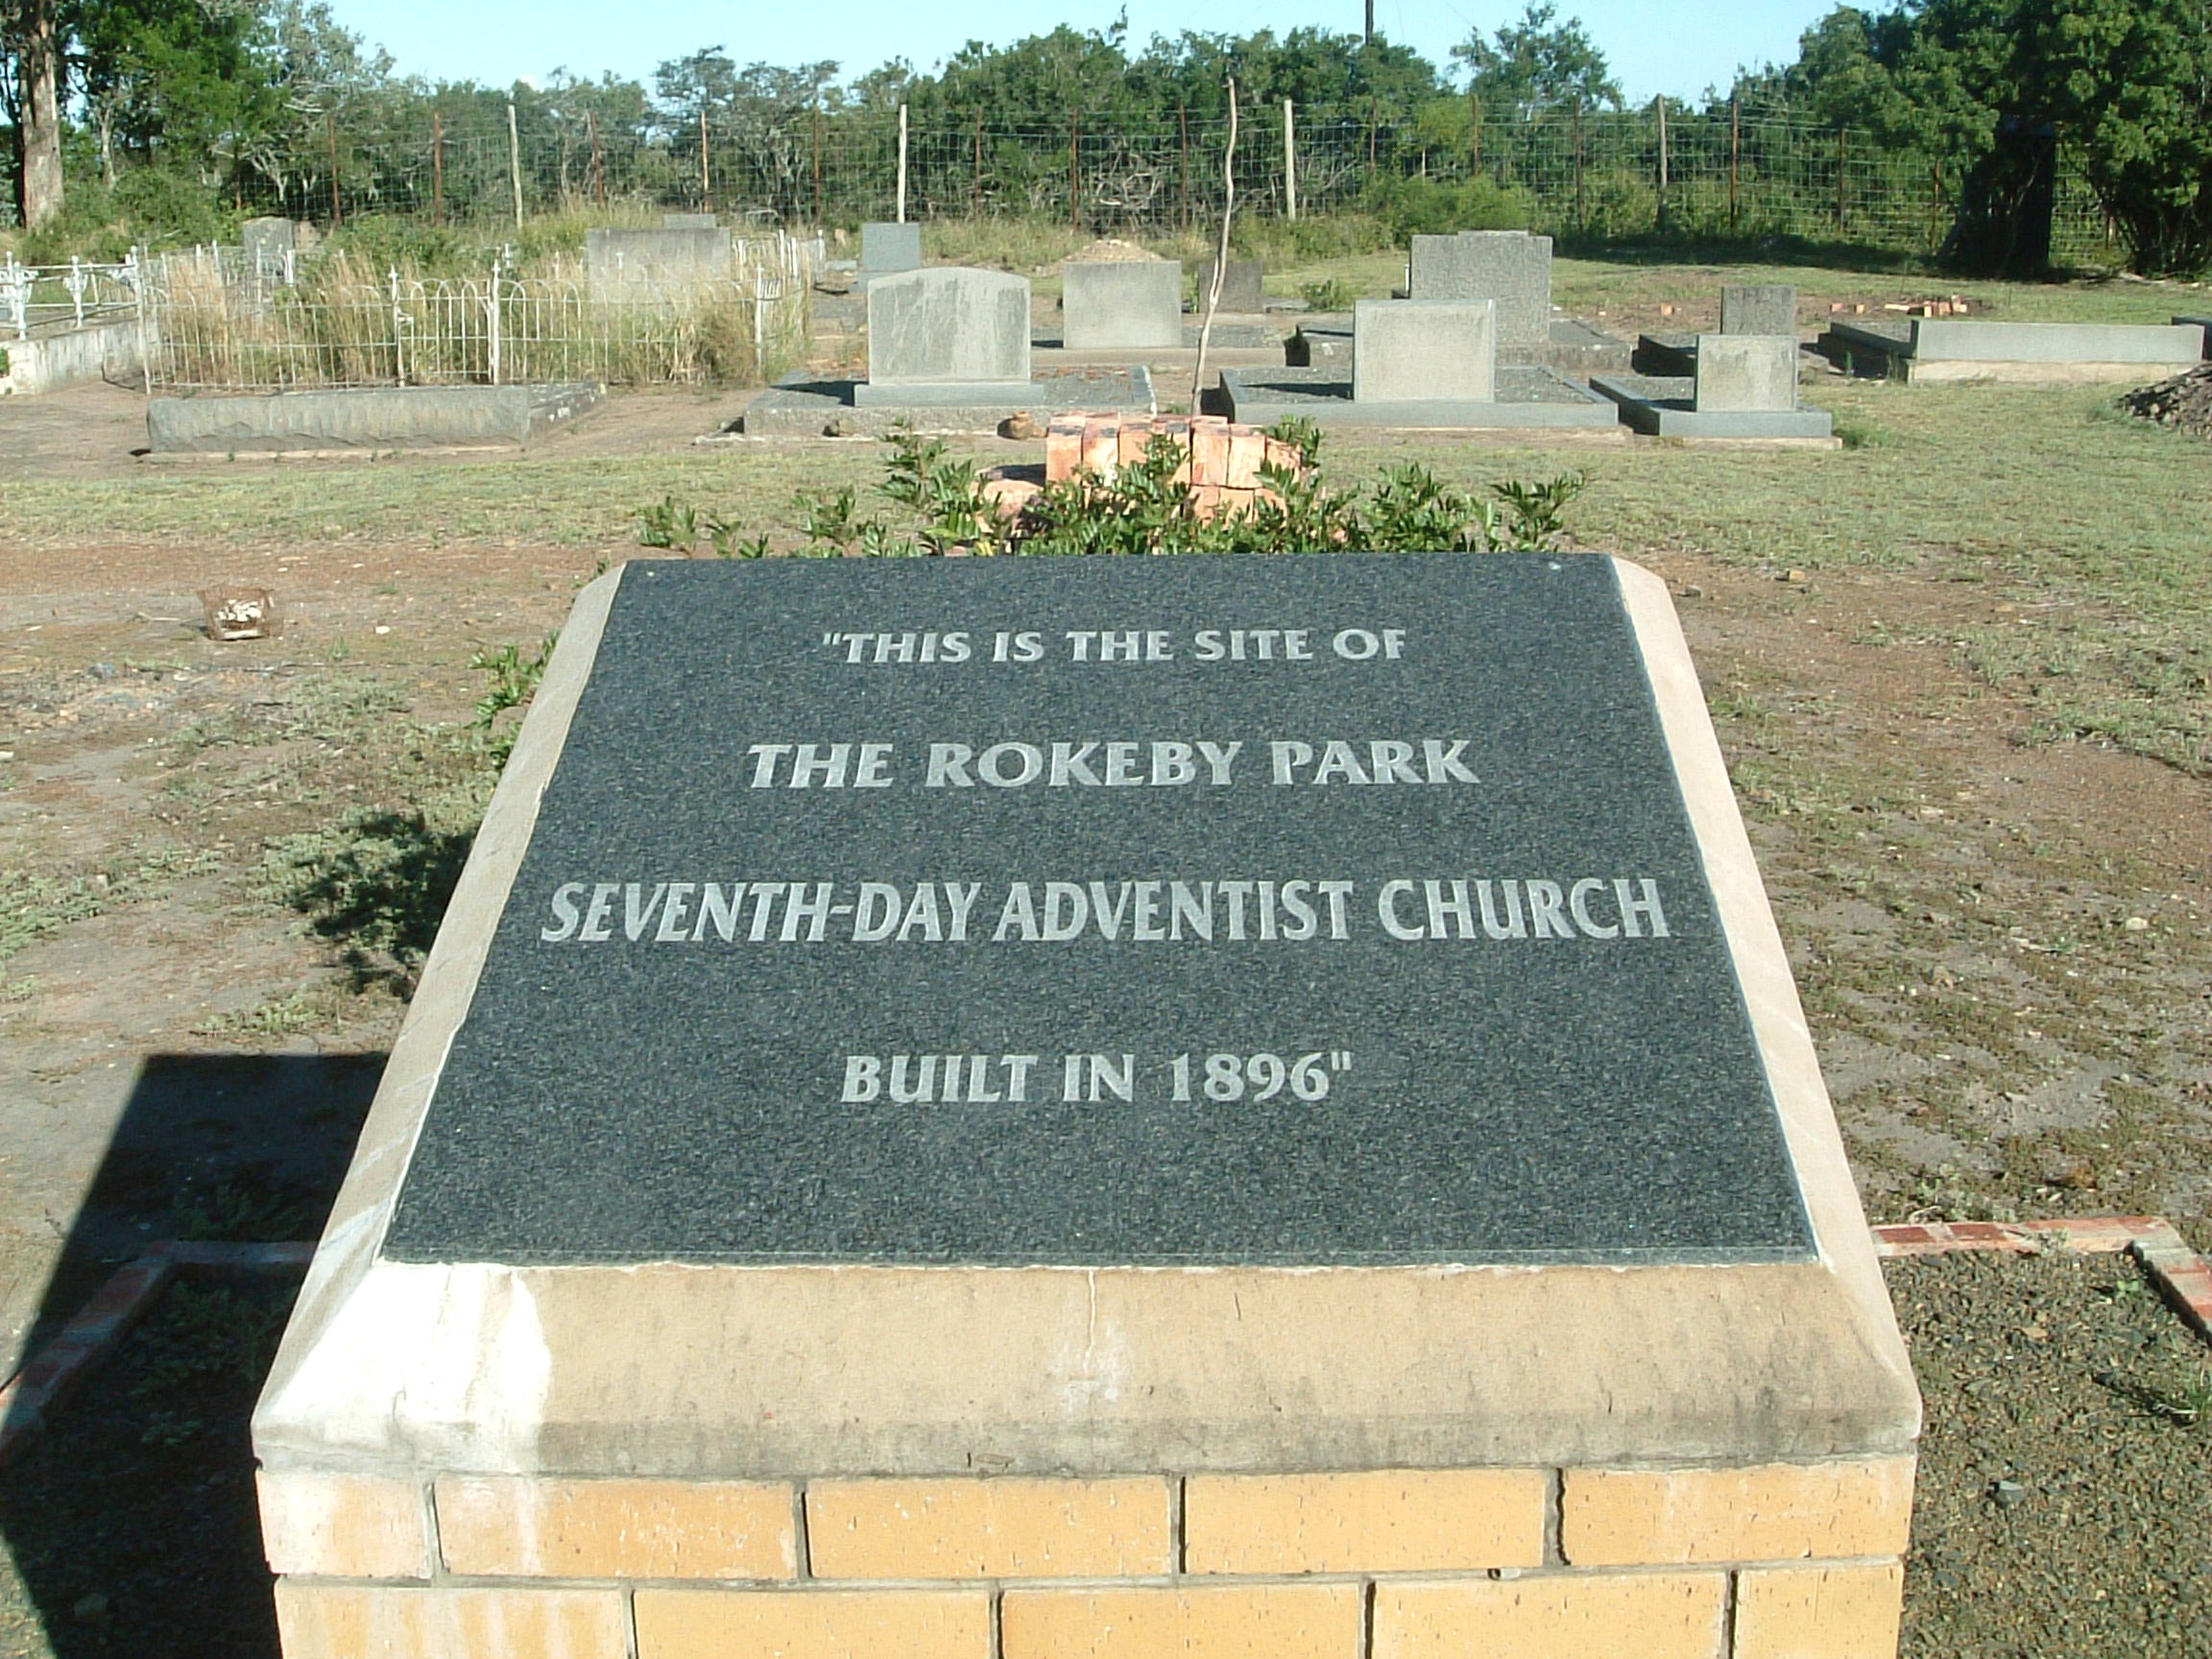 1. Foundation stone and overview